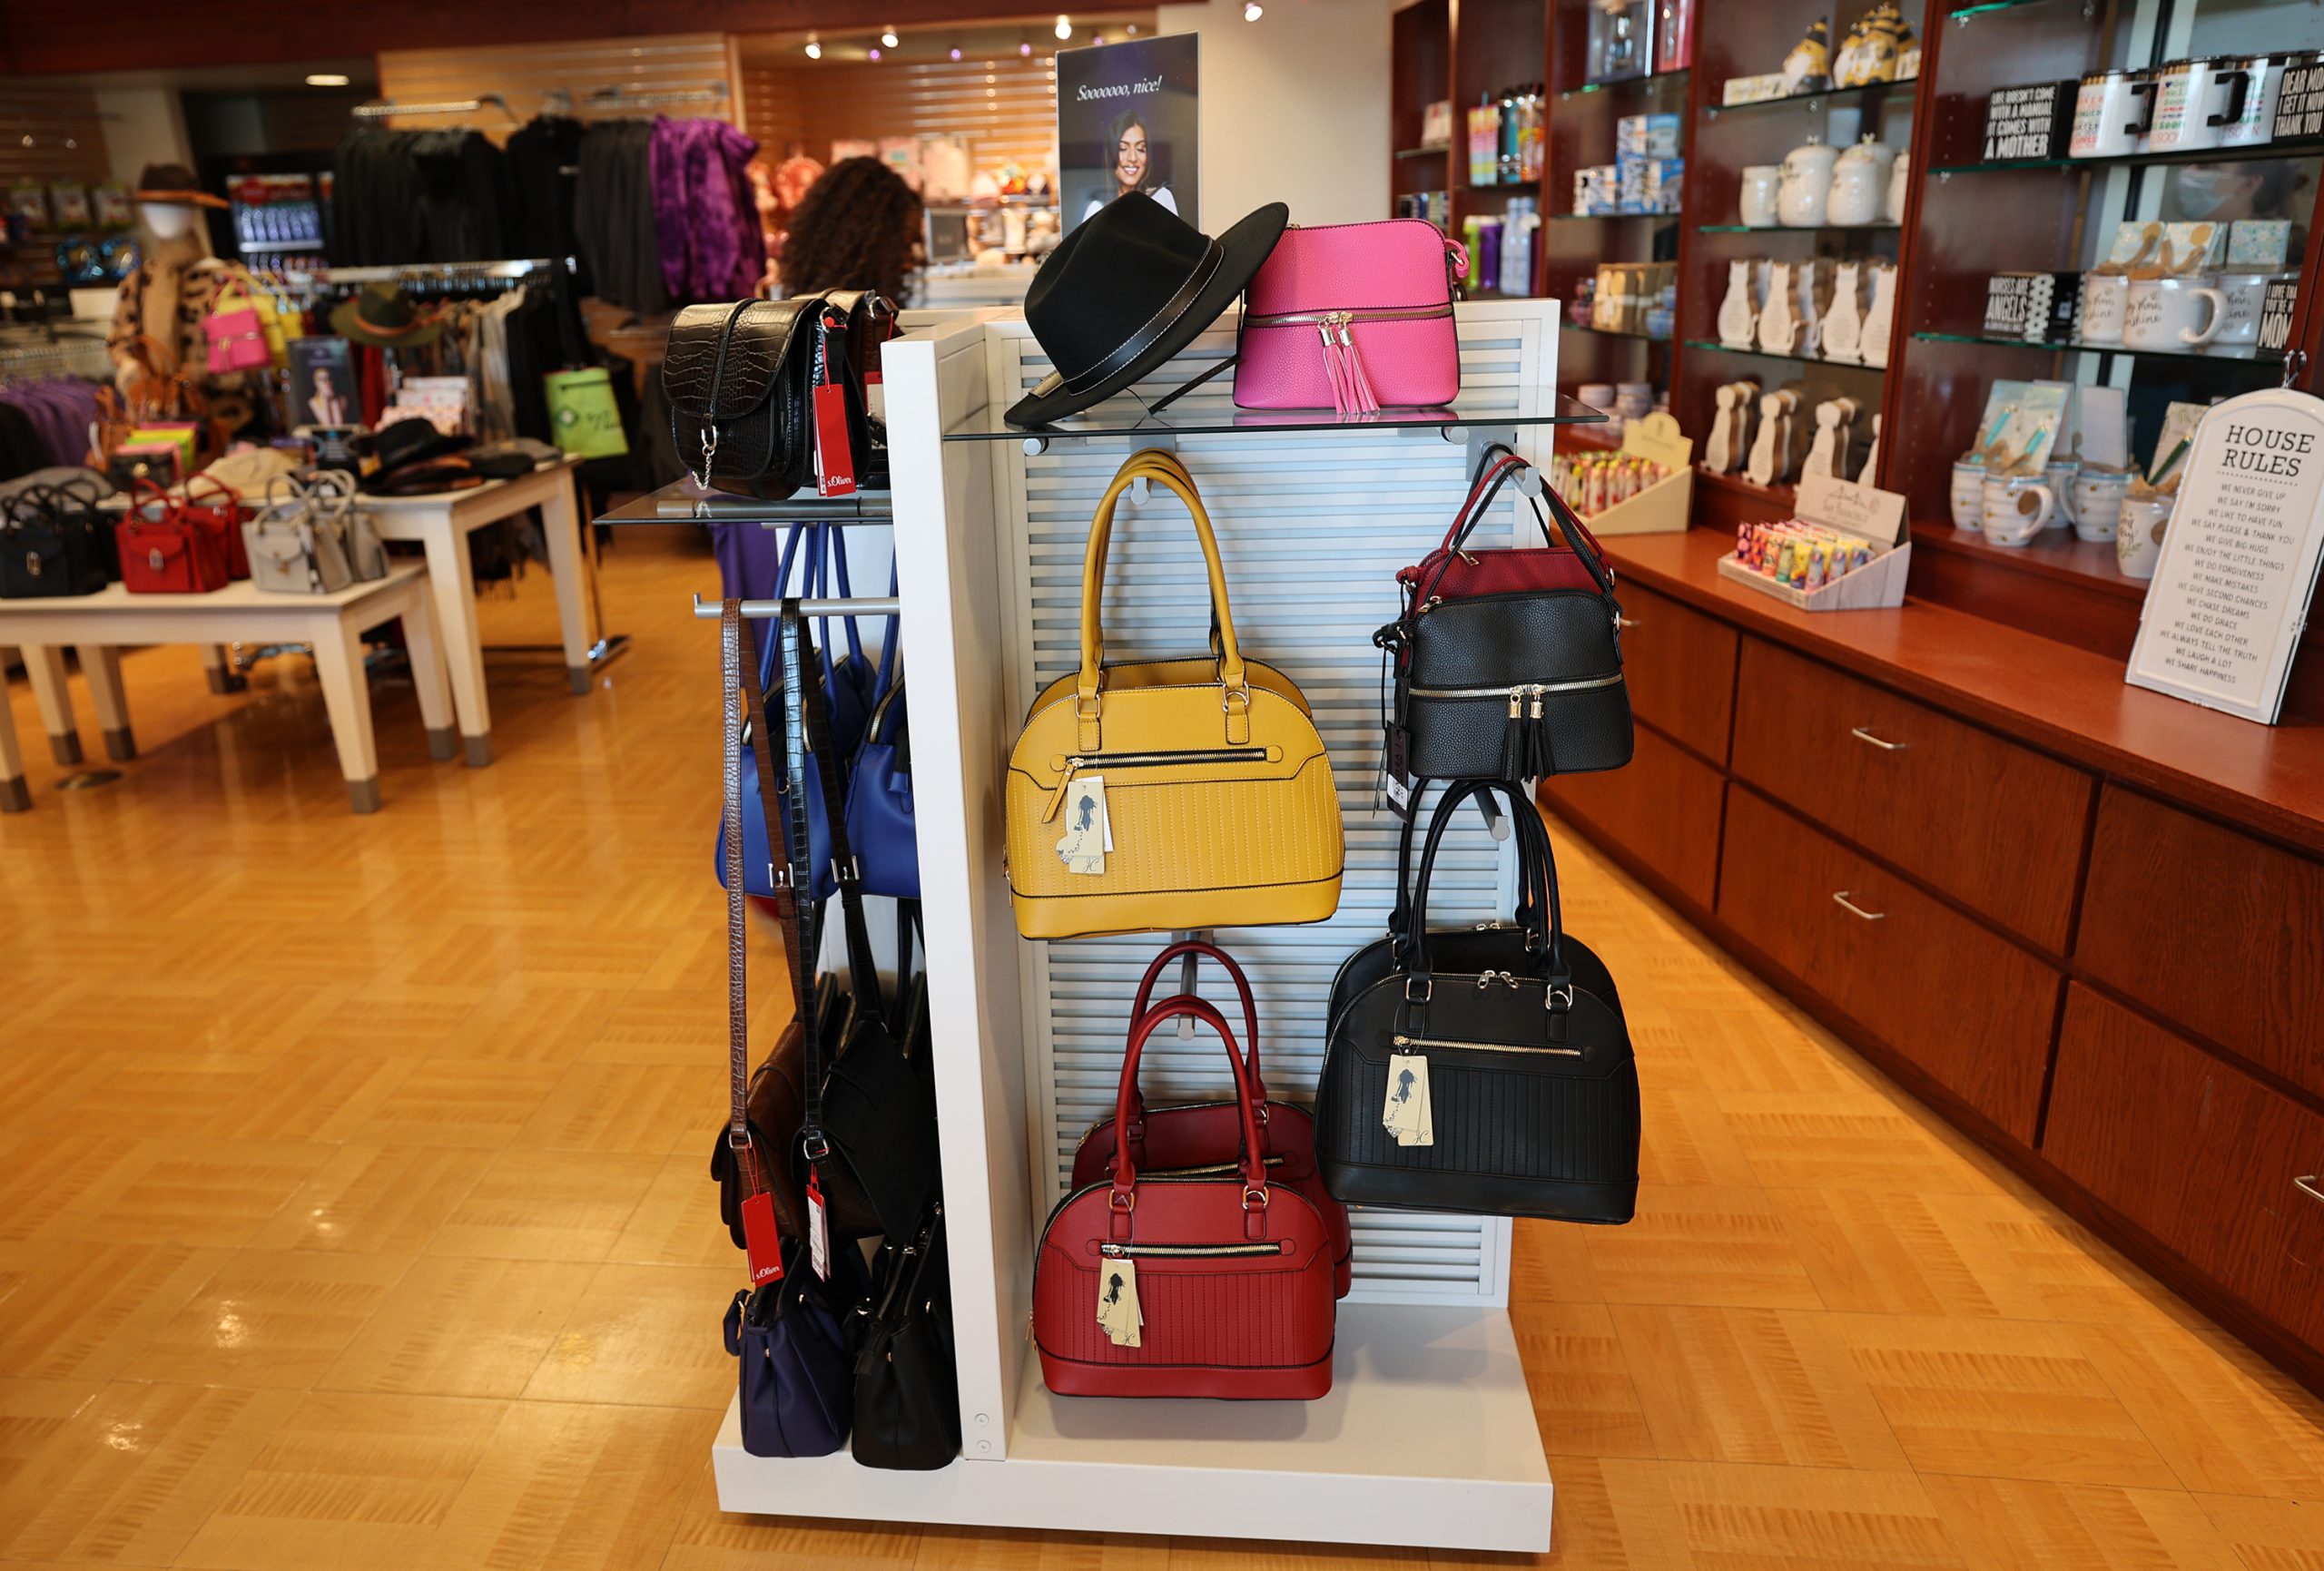 Handbags and fashion accessories at the Cloverkey gift shop in Delnor Community Hospital